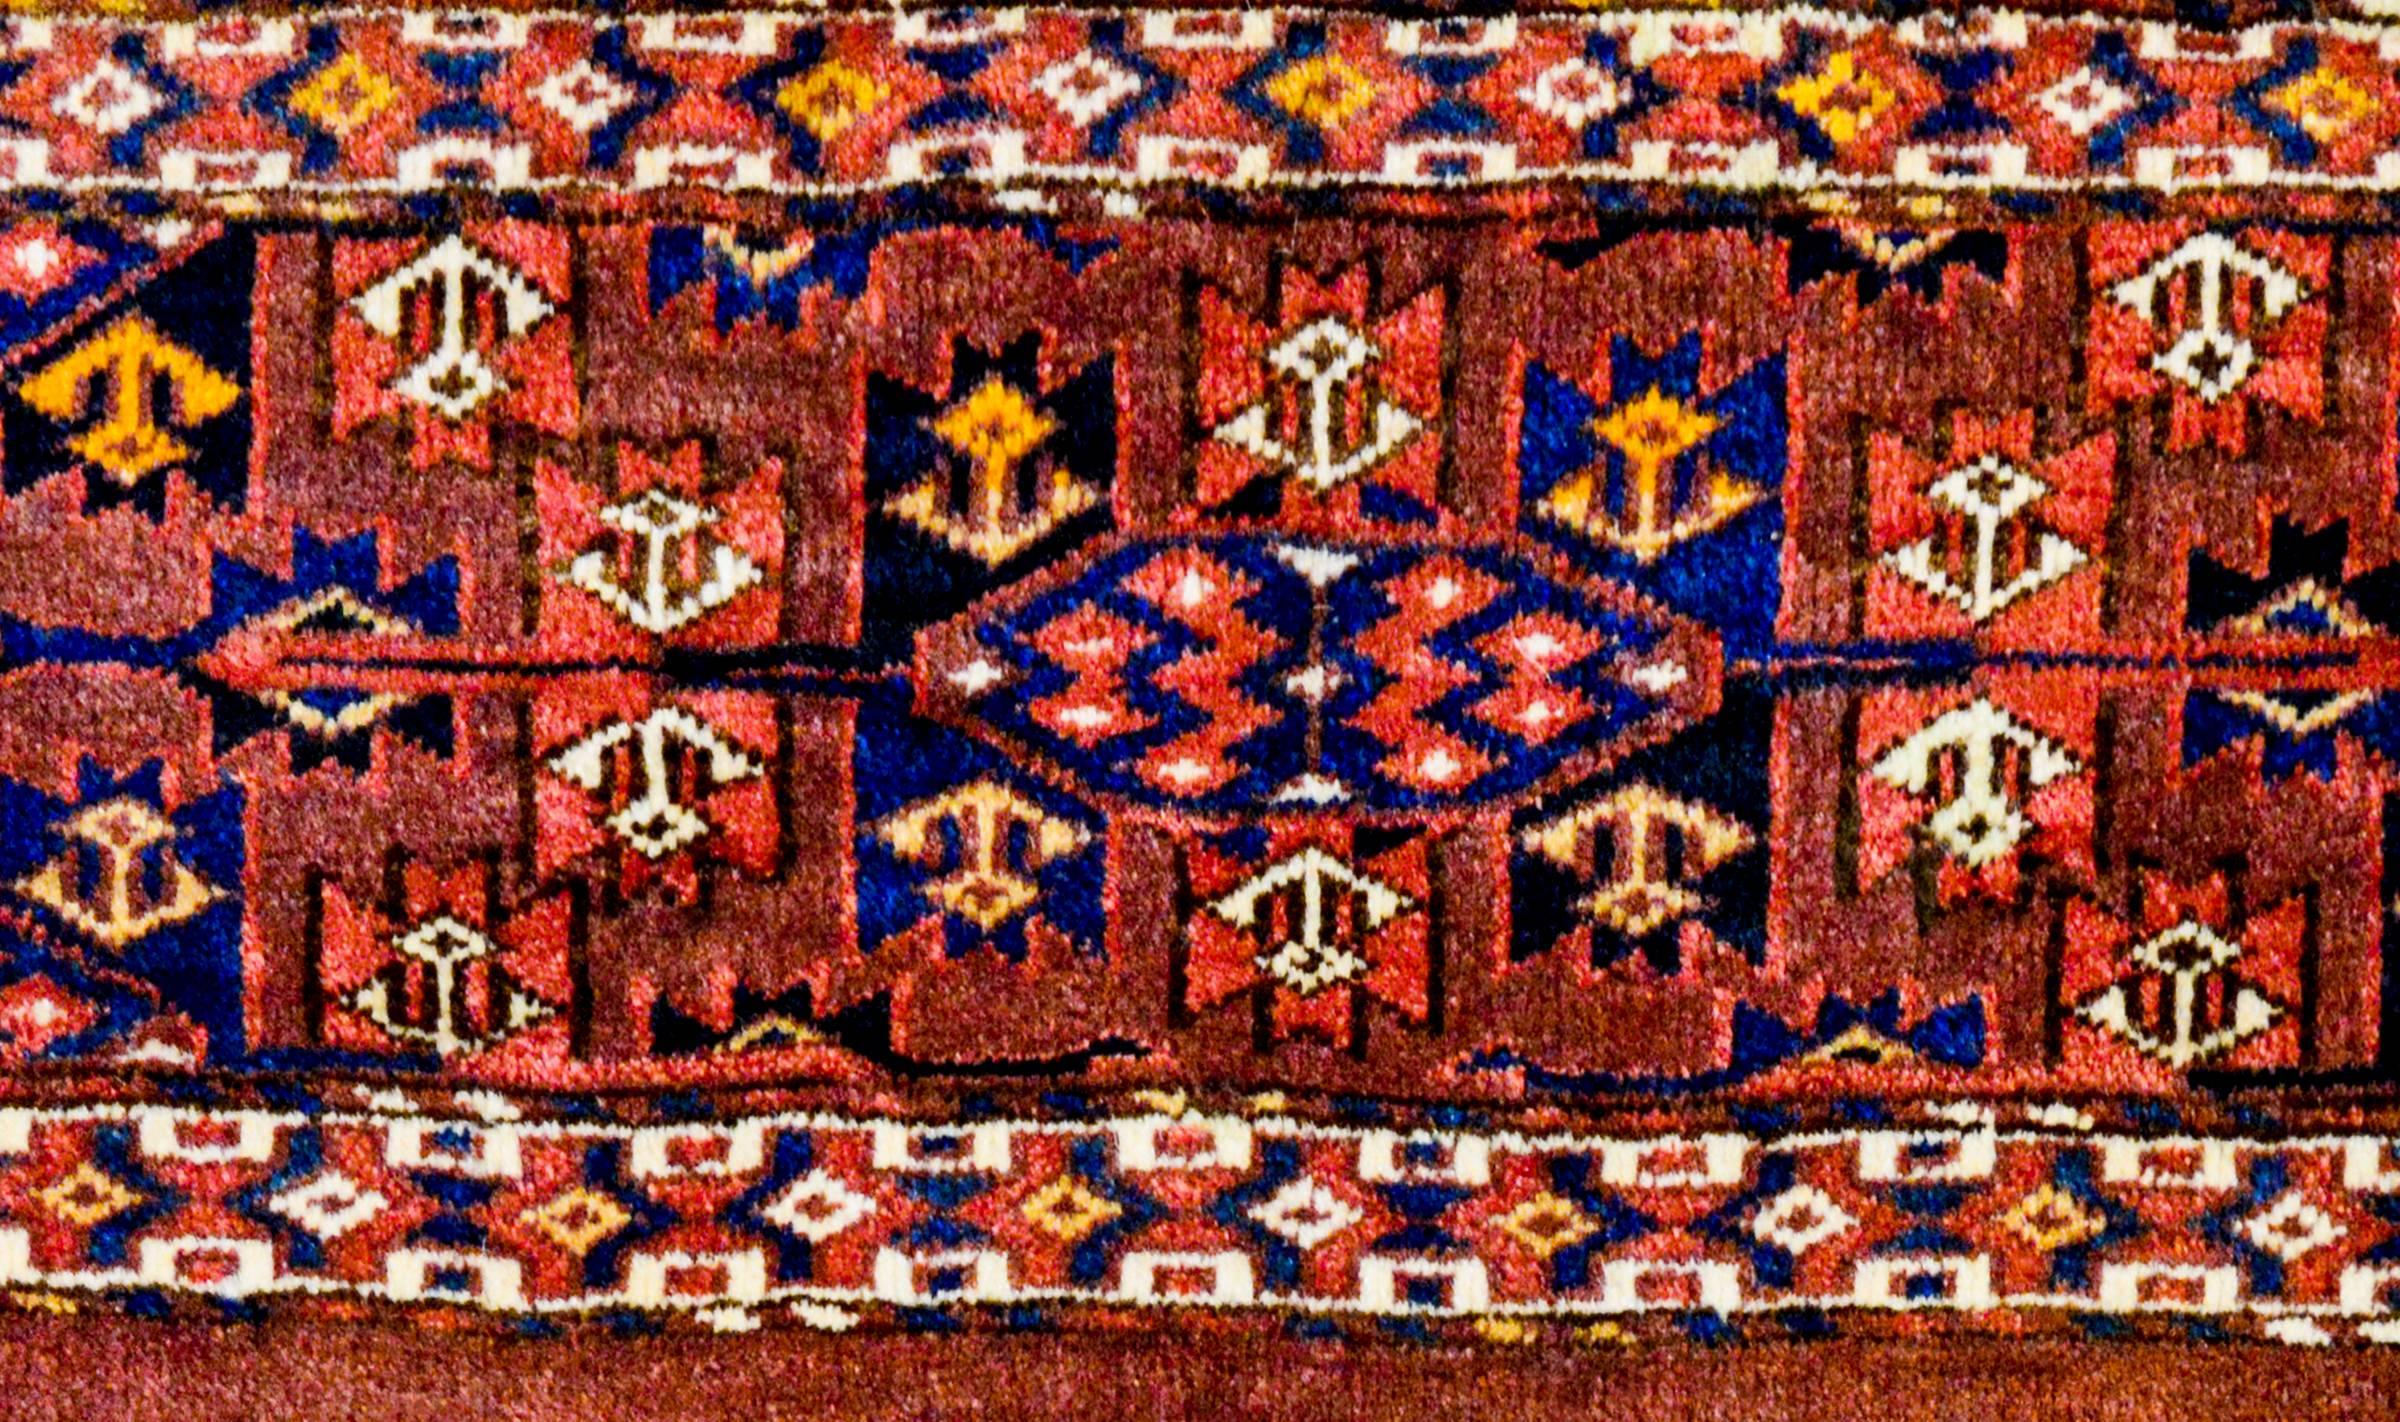 A beautiful 19th century Persian Yamut rug with an incredible geometric pattern woven in crimson, indigo, gold and natural brown wool. The border is contrasting is color, but similar in geometric style.